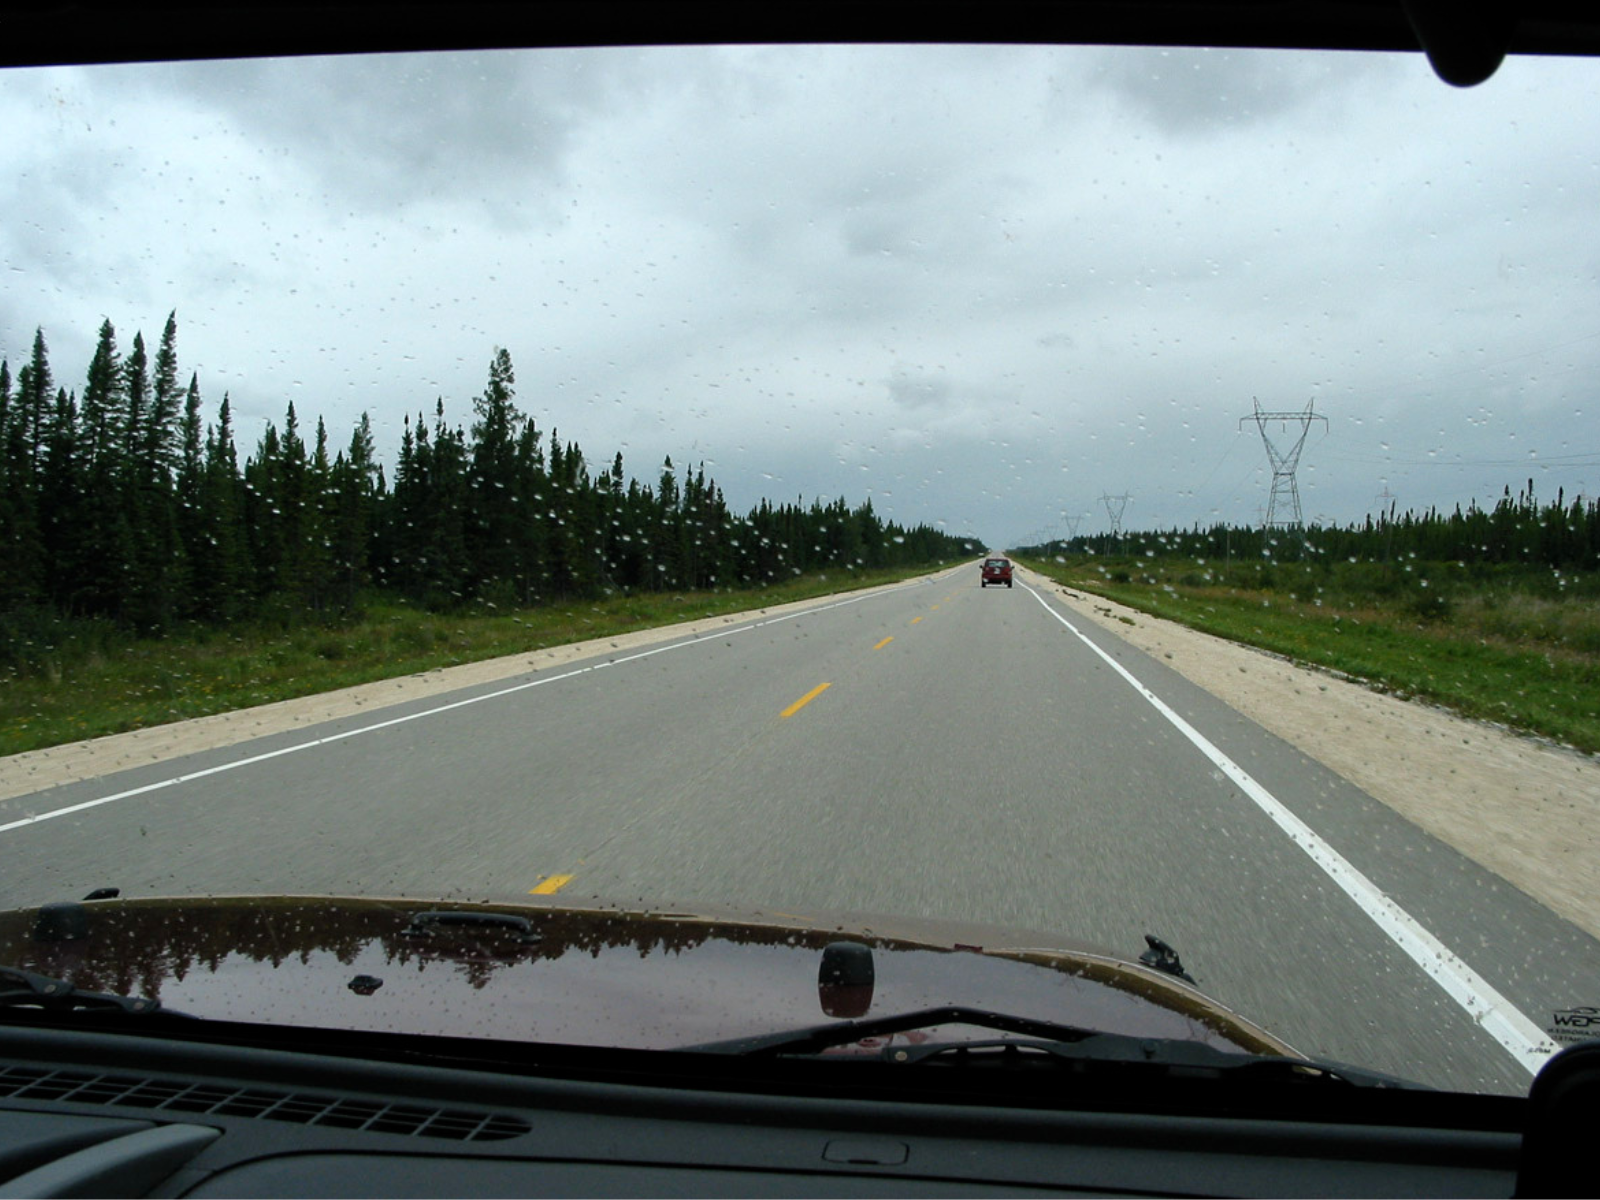 Photograph from inside a vehicle looking down a longer stretch of two-way road, with conifer trees across the ditch on either side.